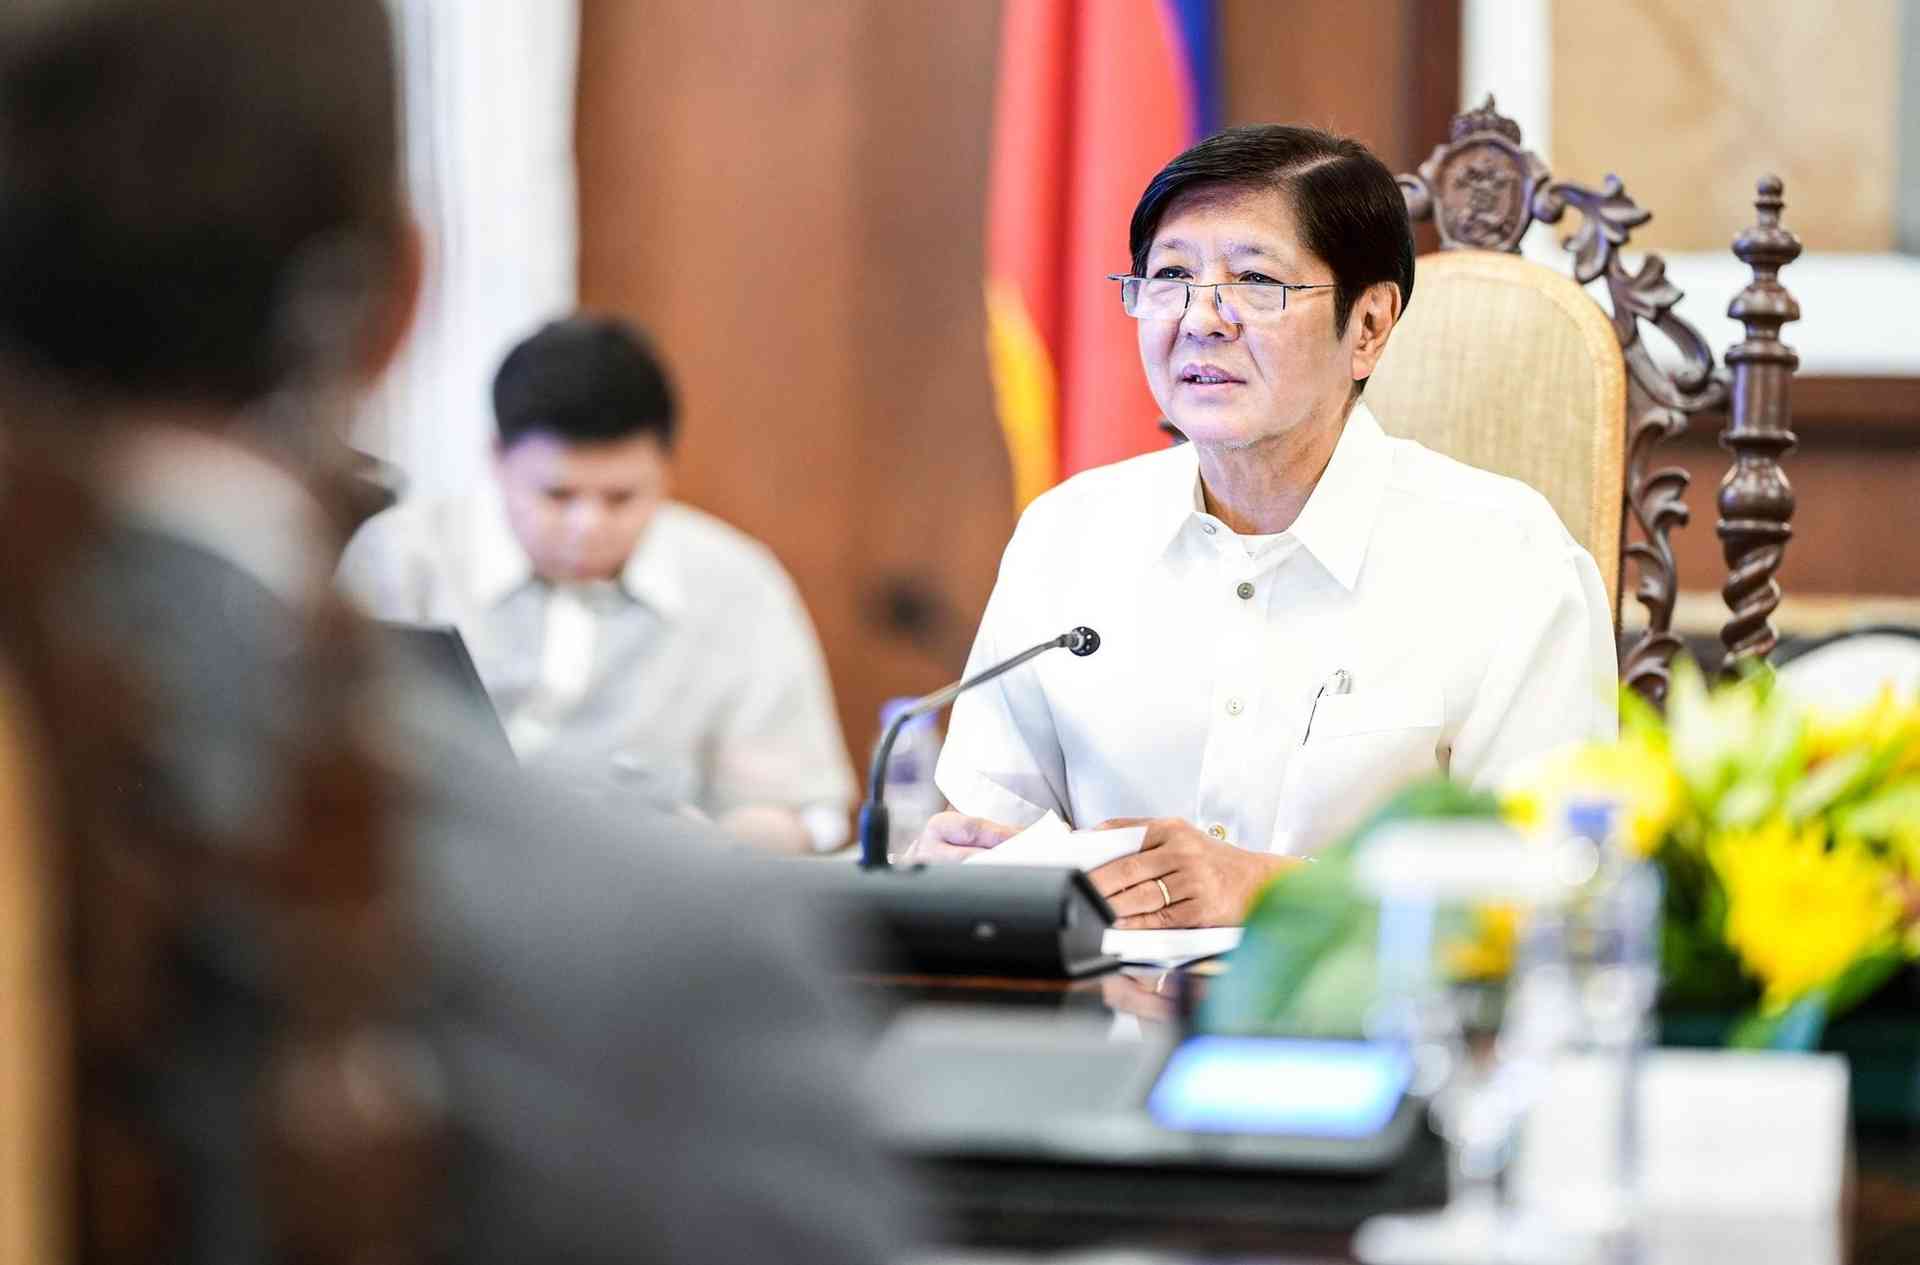 Marcos urges Filipinos on Holy Week to “spread love, serve others”